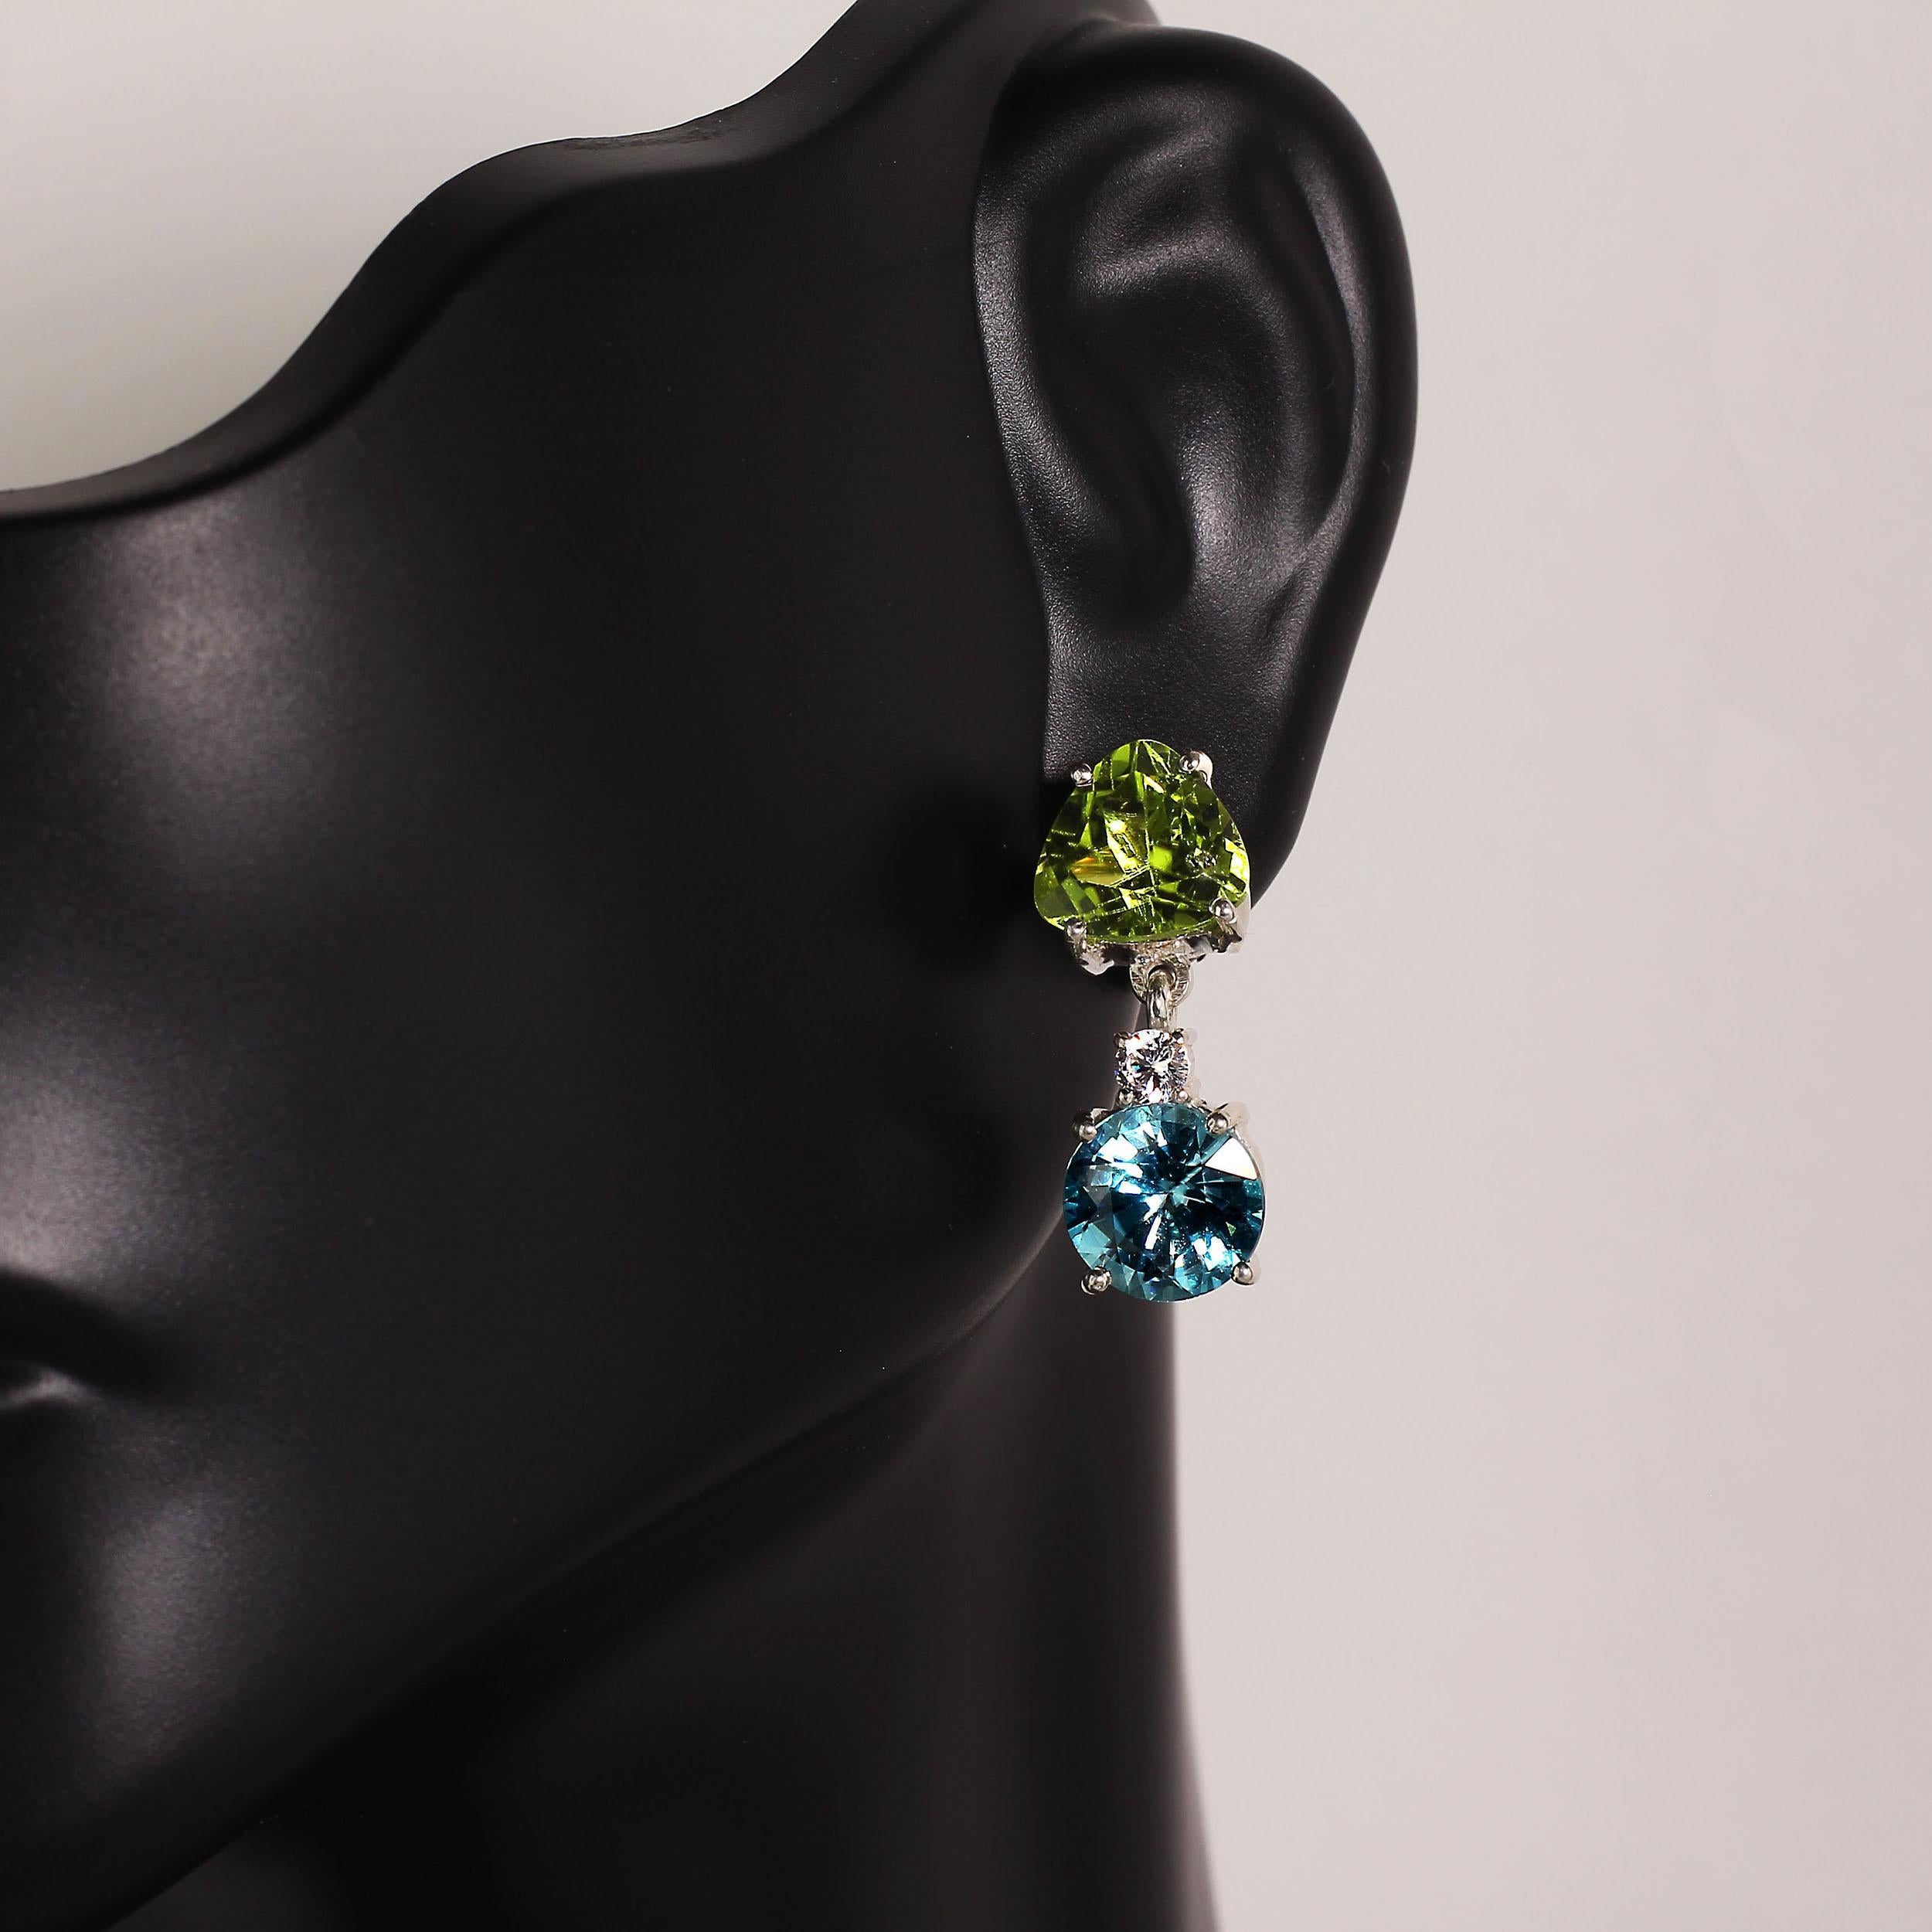 Lively green Peridot and blue Zircon dangle earrings. These swinging earrings feature a trillion sparkling Peridot, a white Cambodian Zircon, and a round bright blue Zircon. The hand made Sterling Silver setting hinges to create maximum swing and